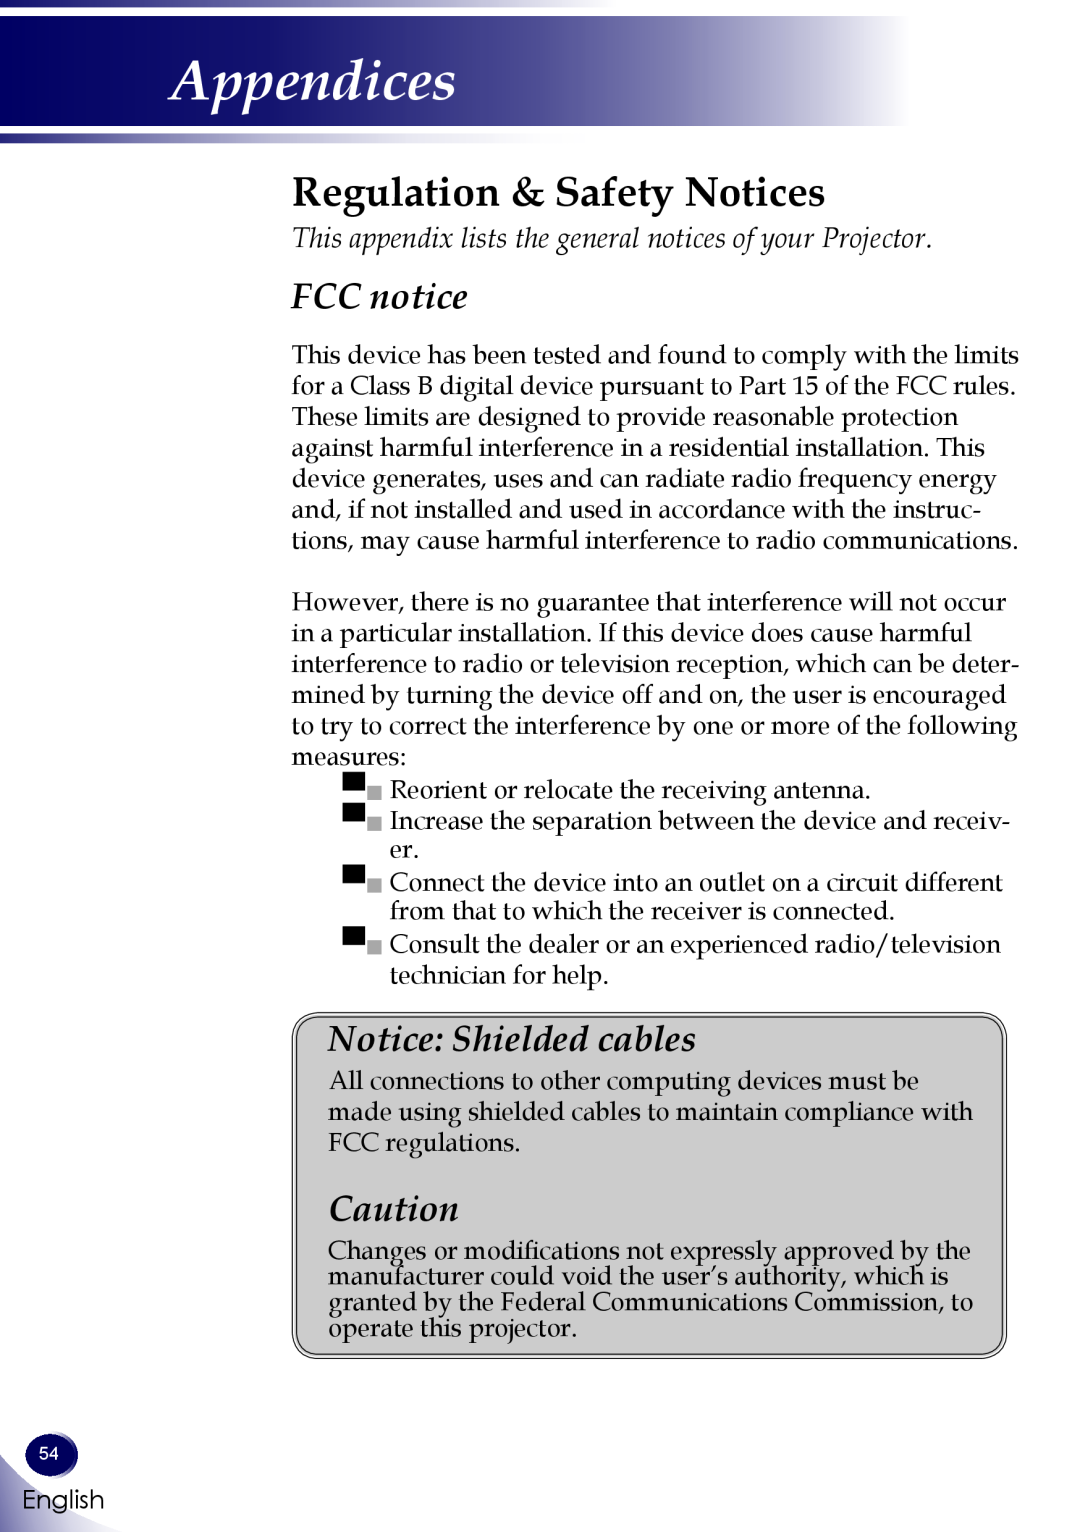 Sanyo PDG-DWL100 owner manual Regulation & Safety Notices, FCC notice, Notice Shielded cables, Appendices 